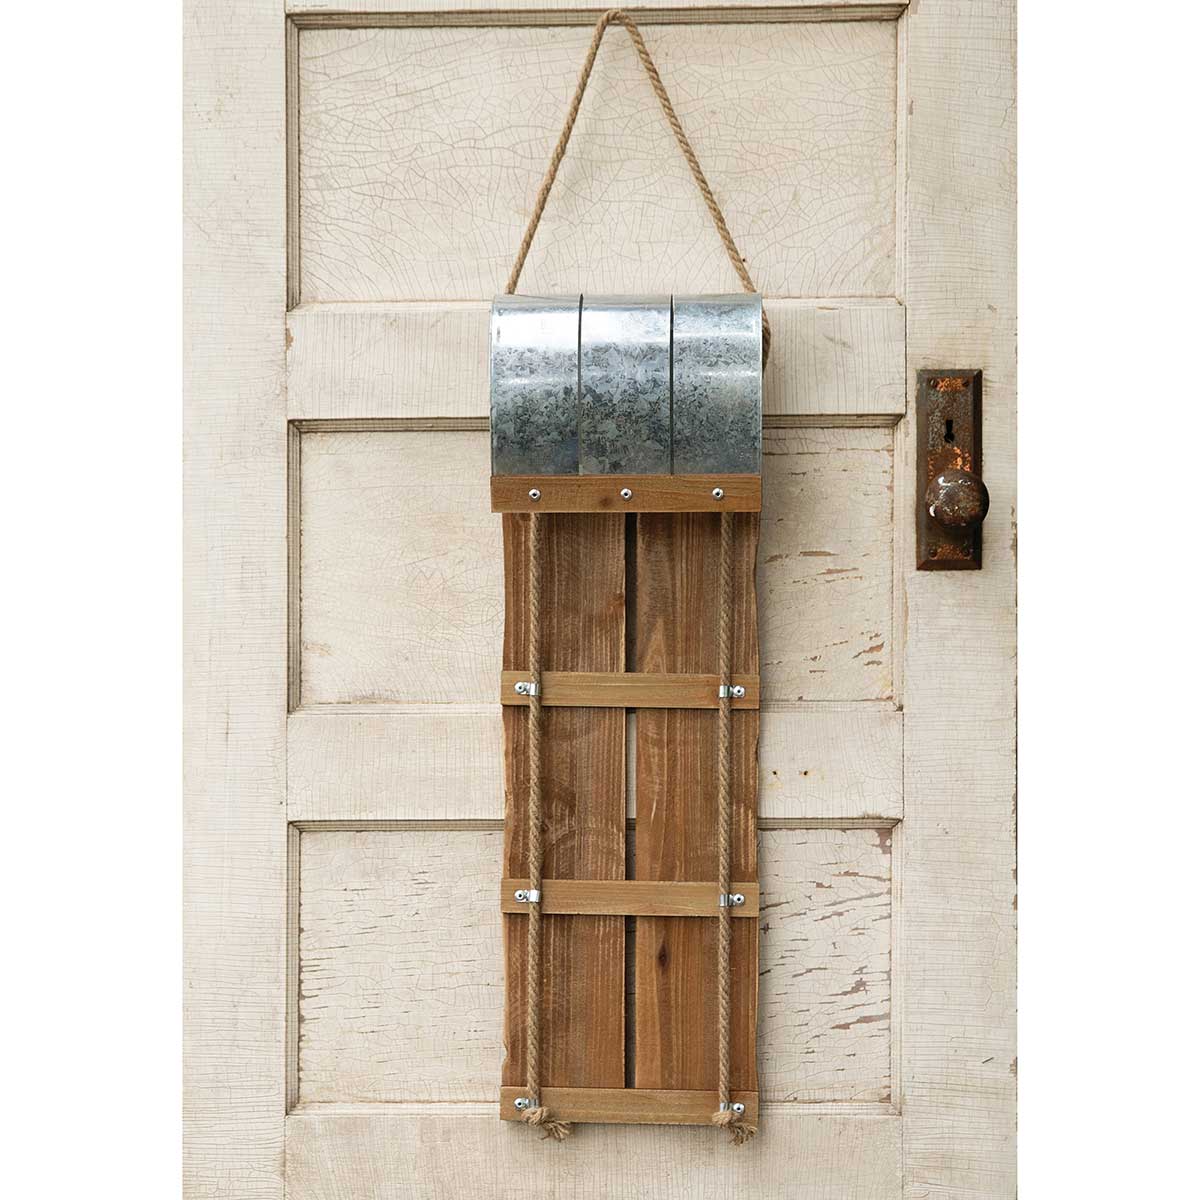 NATURAL WOOD/GALVANIZED METAL SLED WITH ROPE HANGER